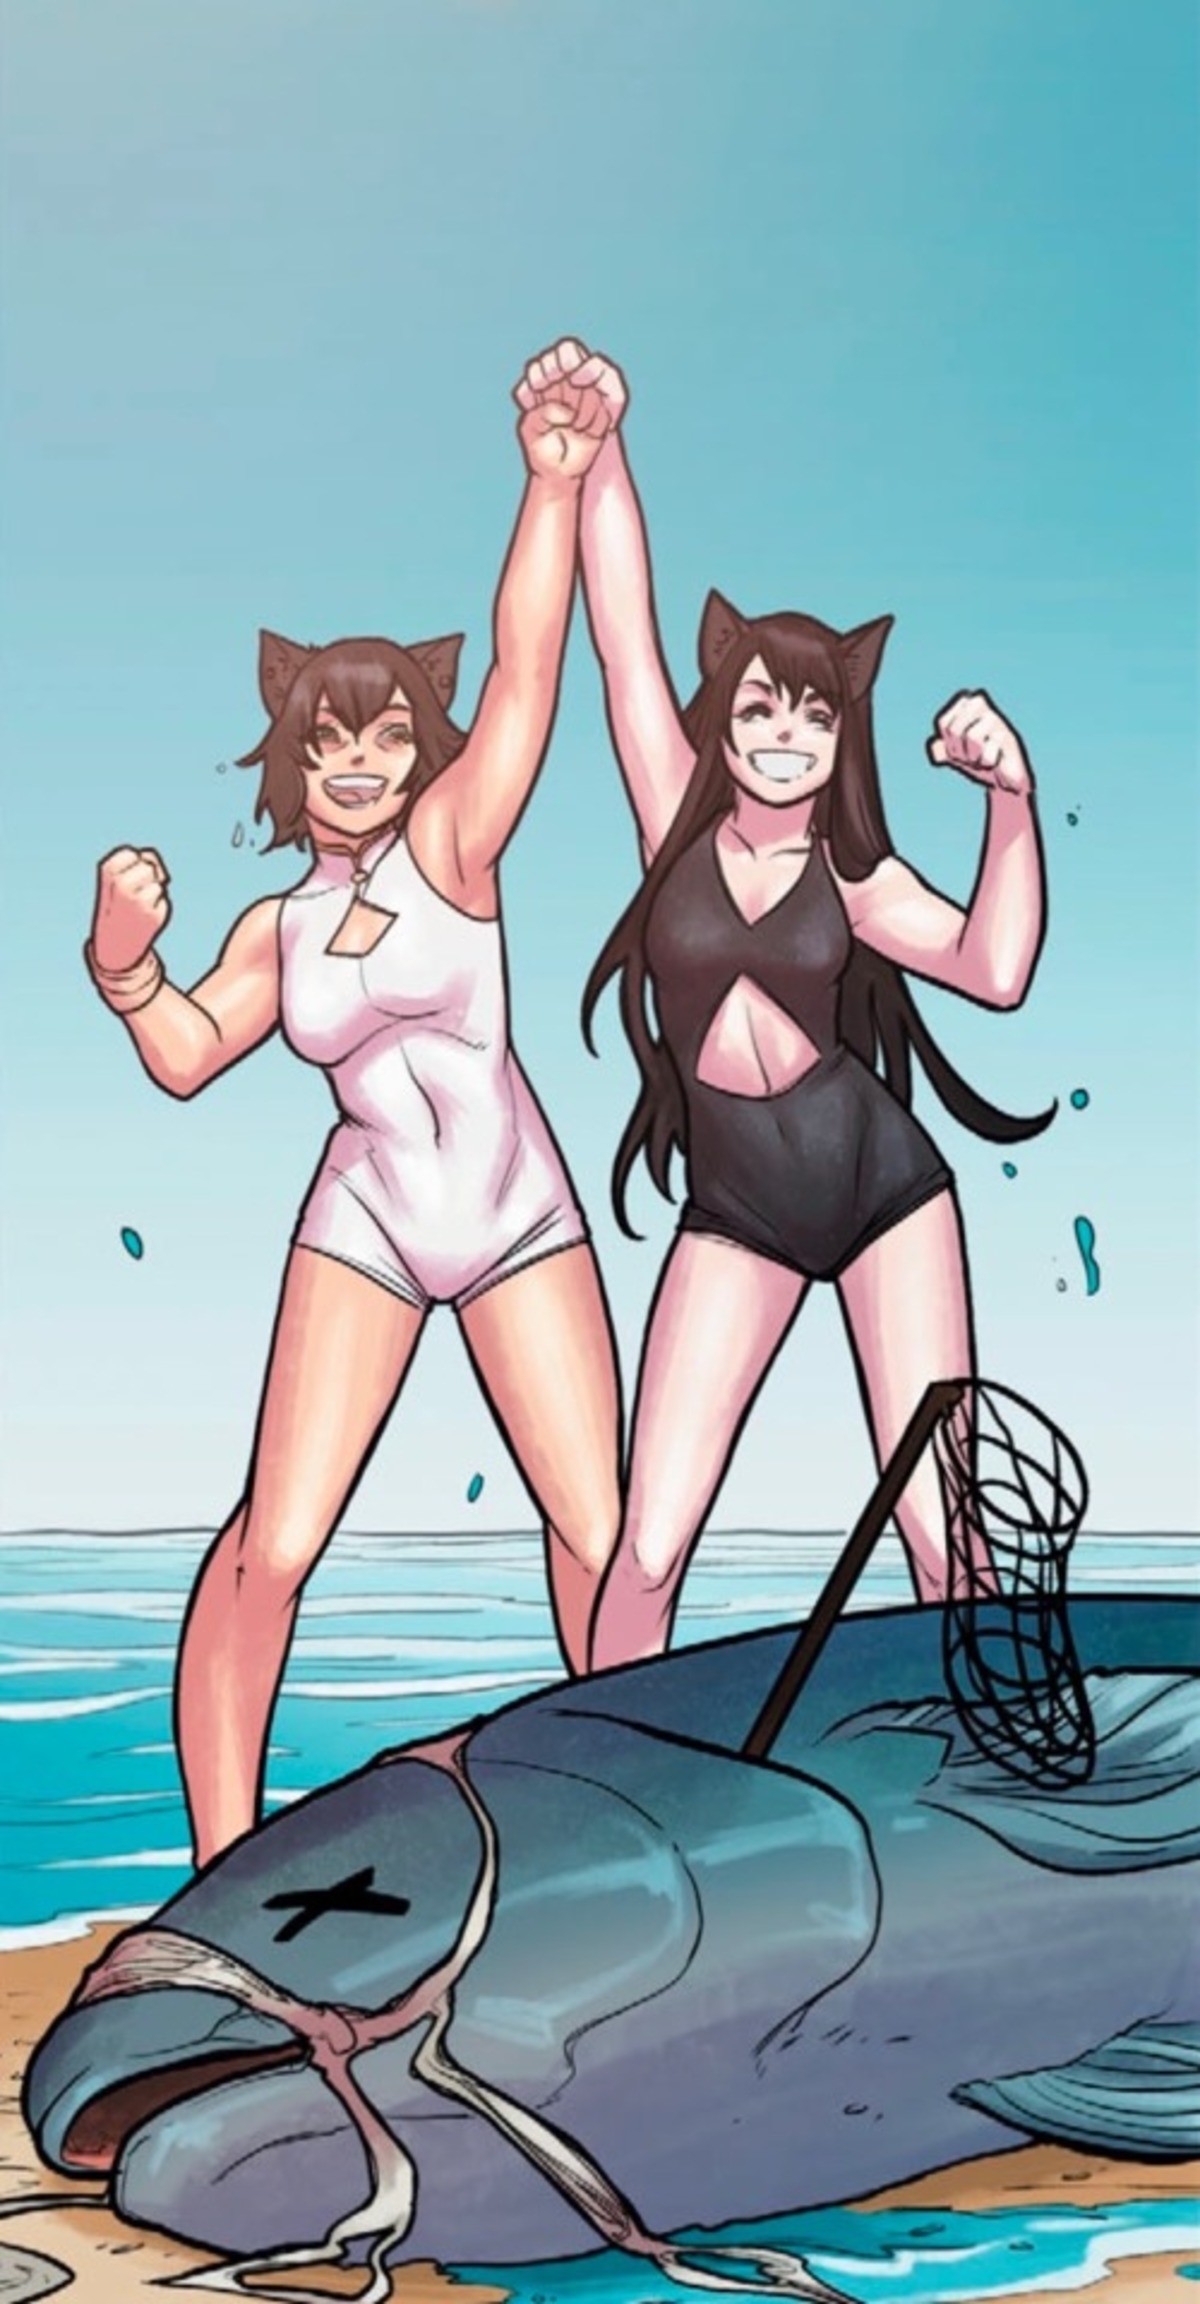 Happy kittys. .. Can a king send me the sauce of the rwby comic?